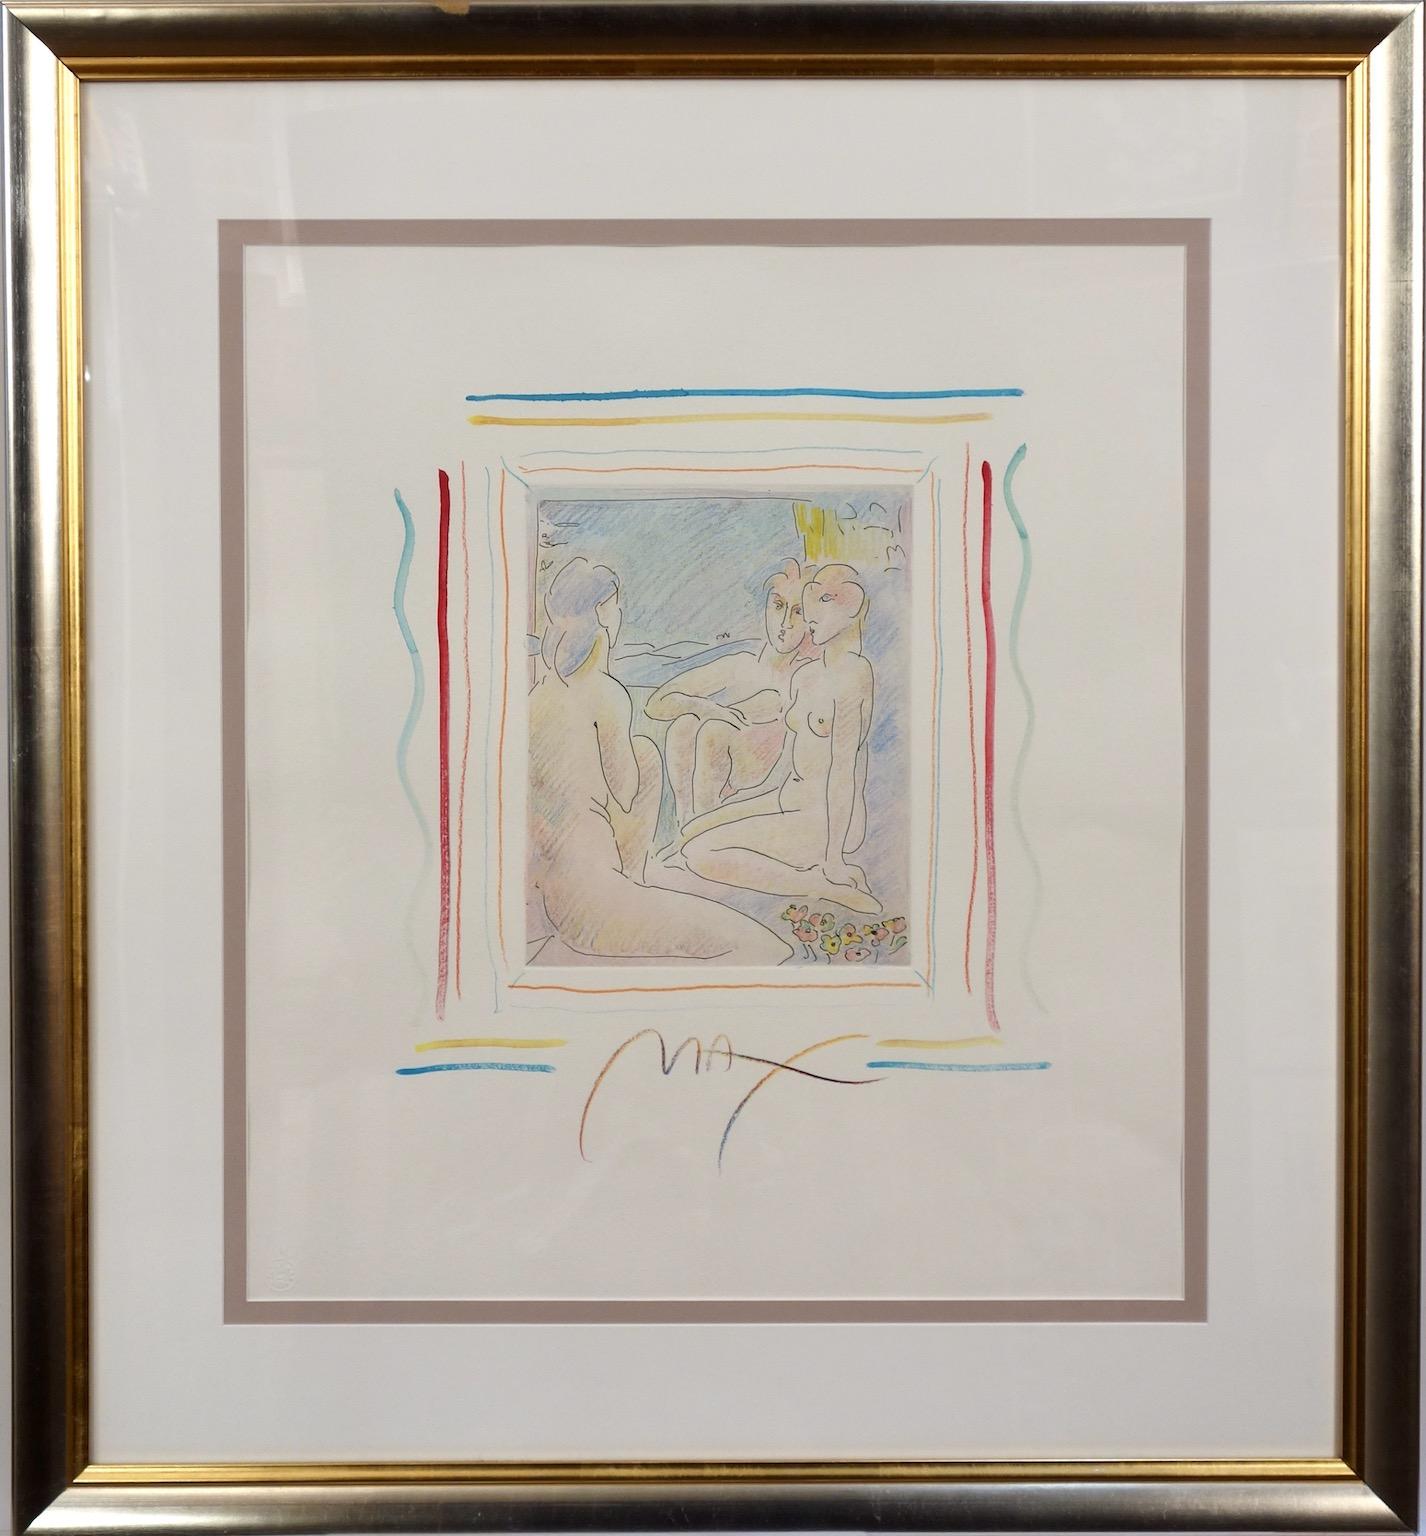 Homage to Picasso Vol I, #II - Print by Peter Max